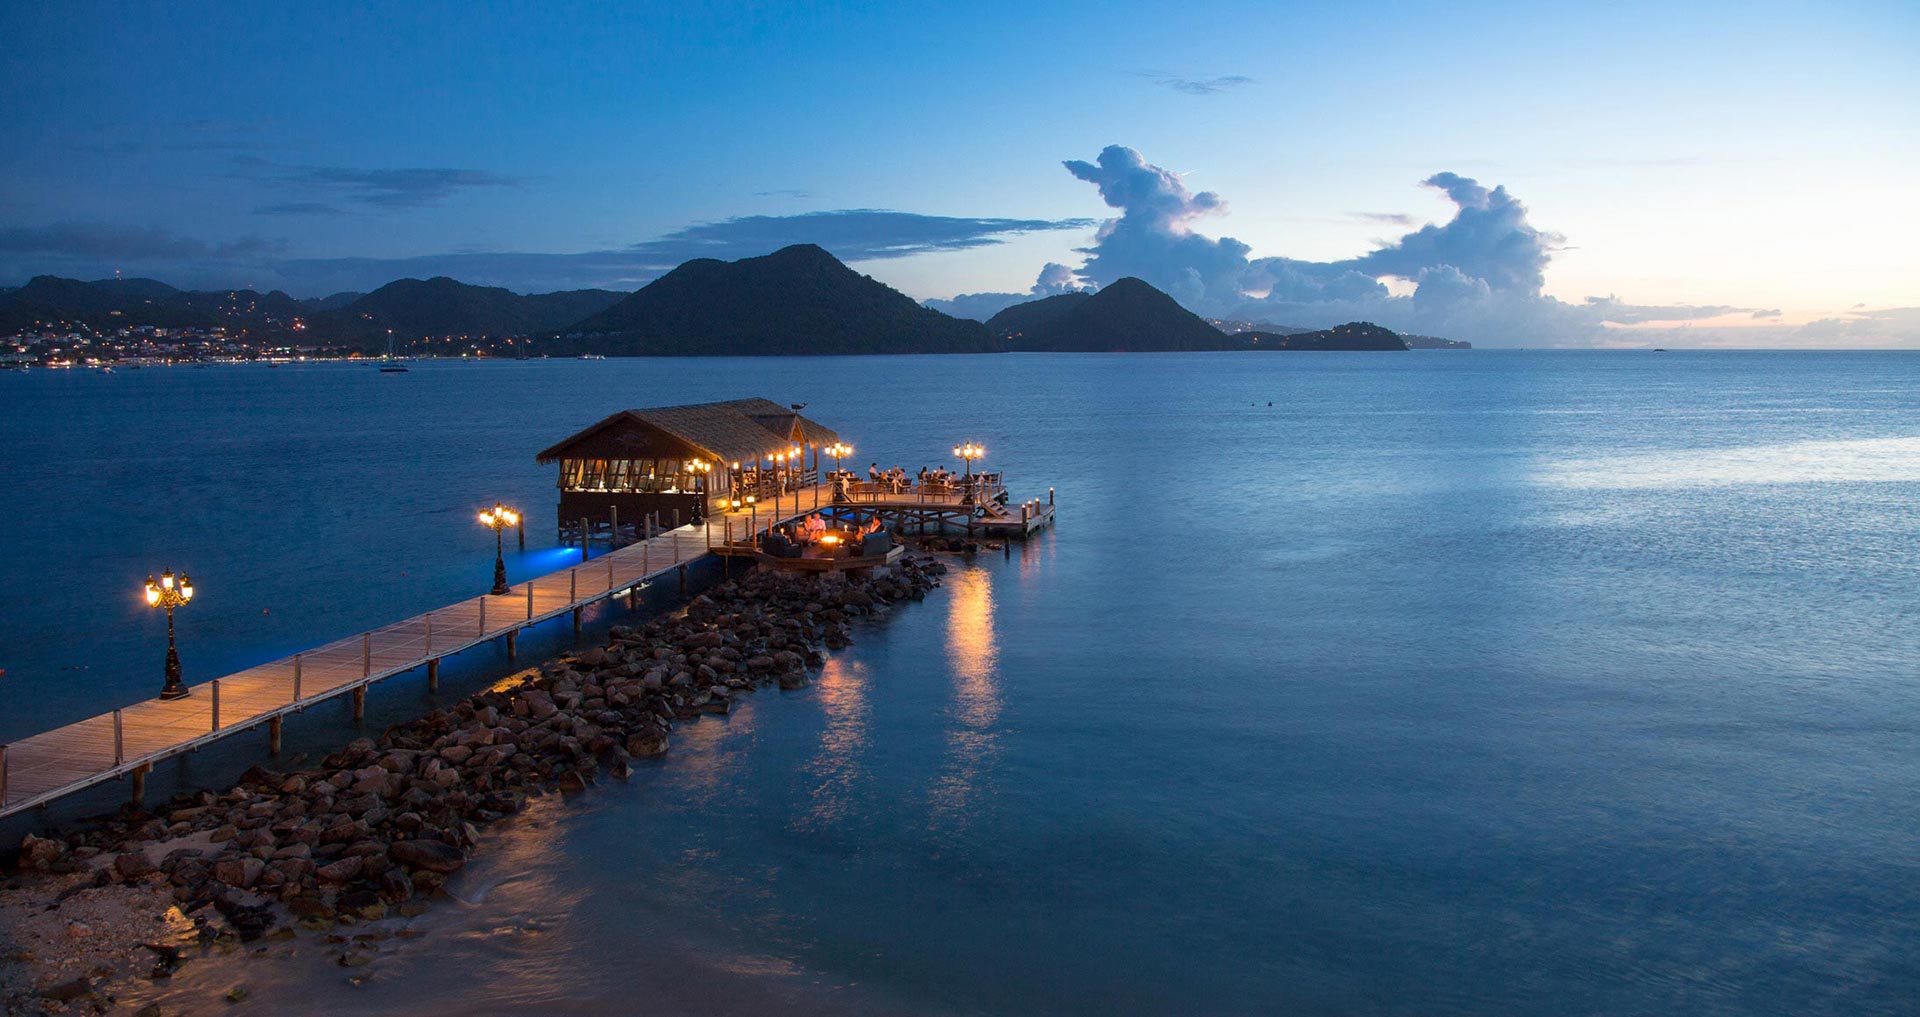 Sandals Grande St. Lucian at night